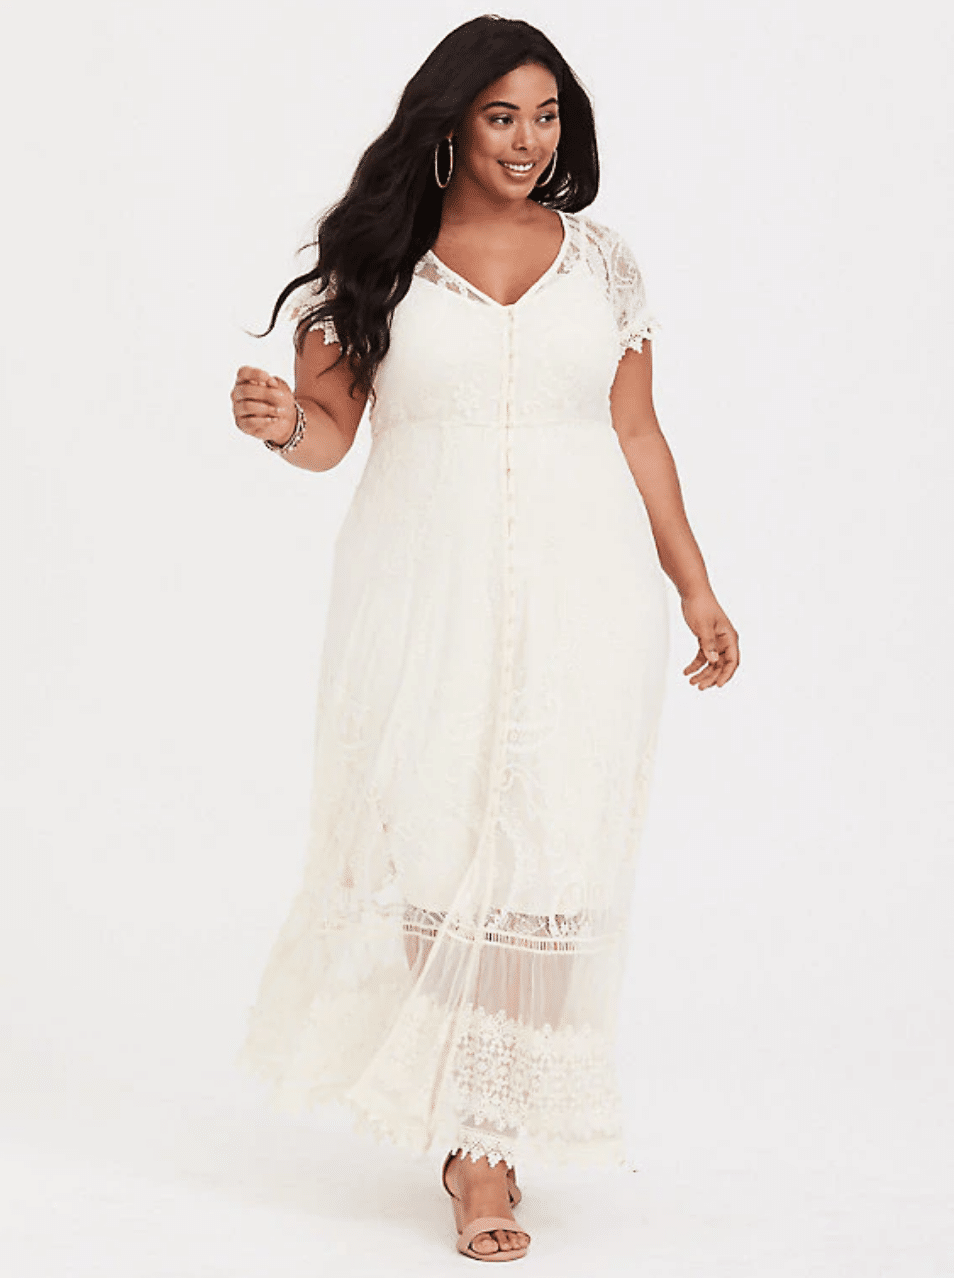 Oh Hey, Curvy Girl! You'll Love These Ultra Pretty Dresses Under $150 ...